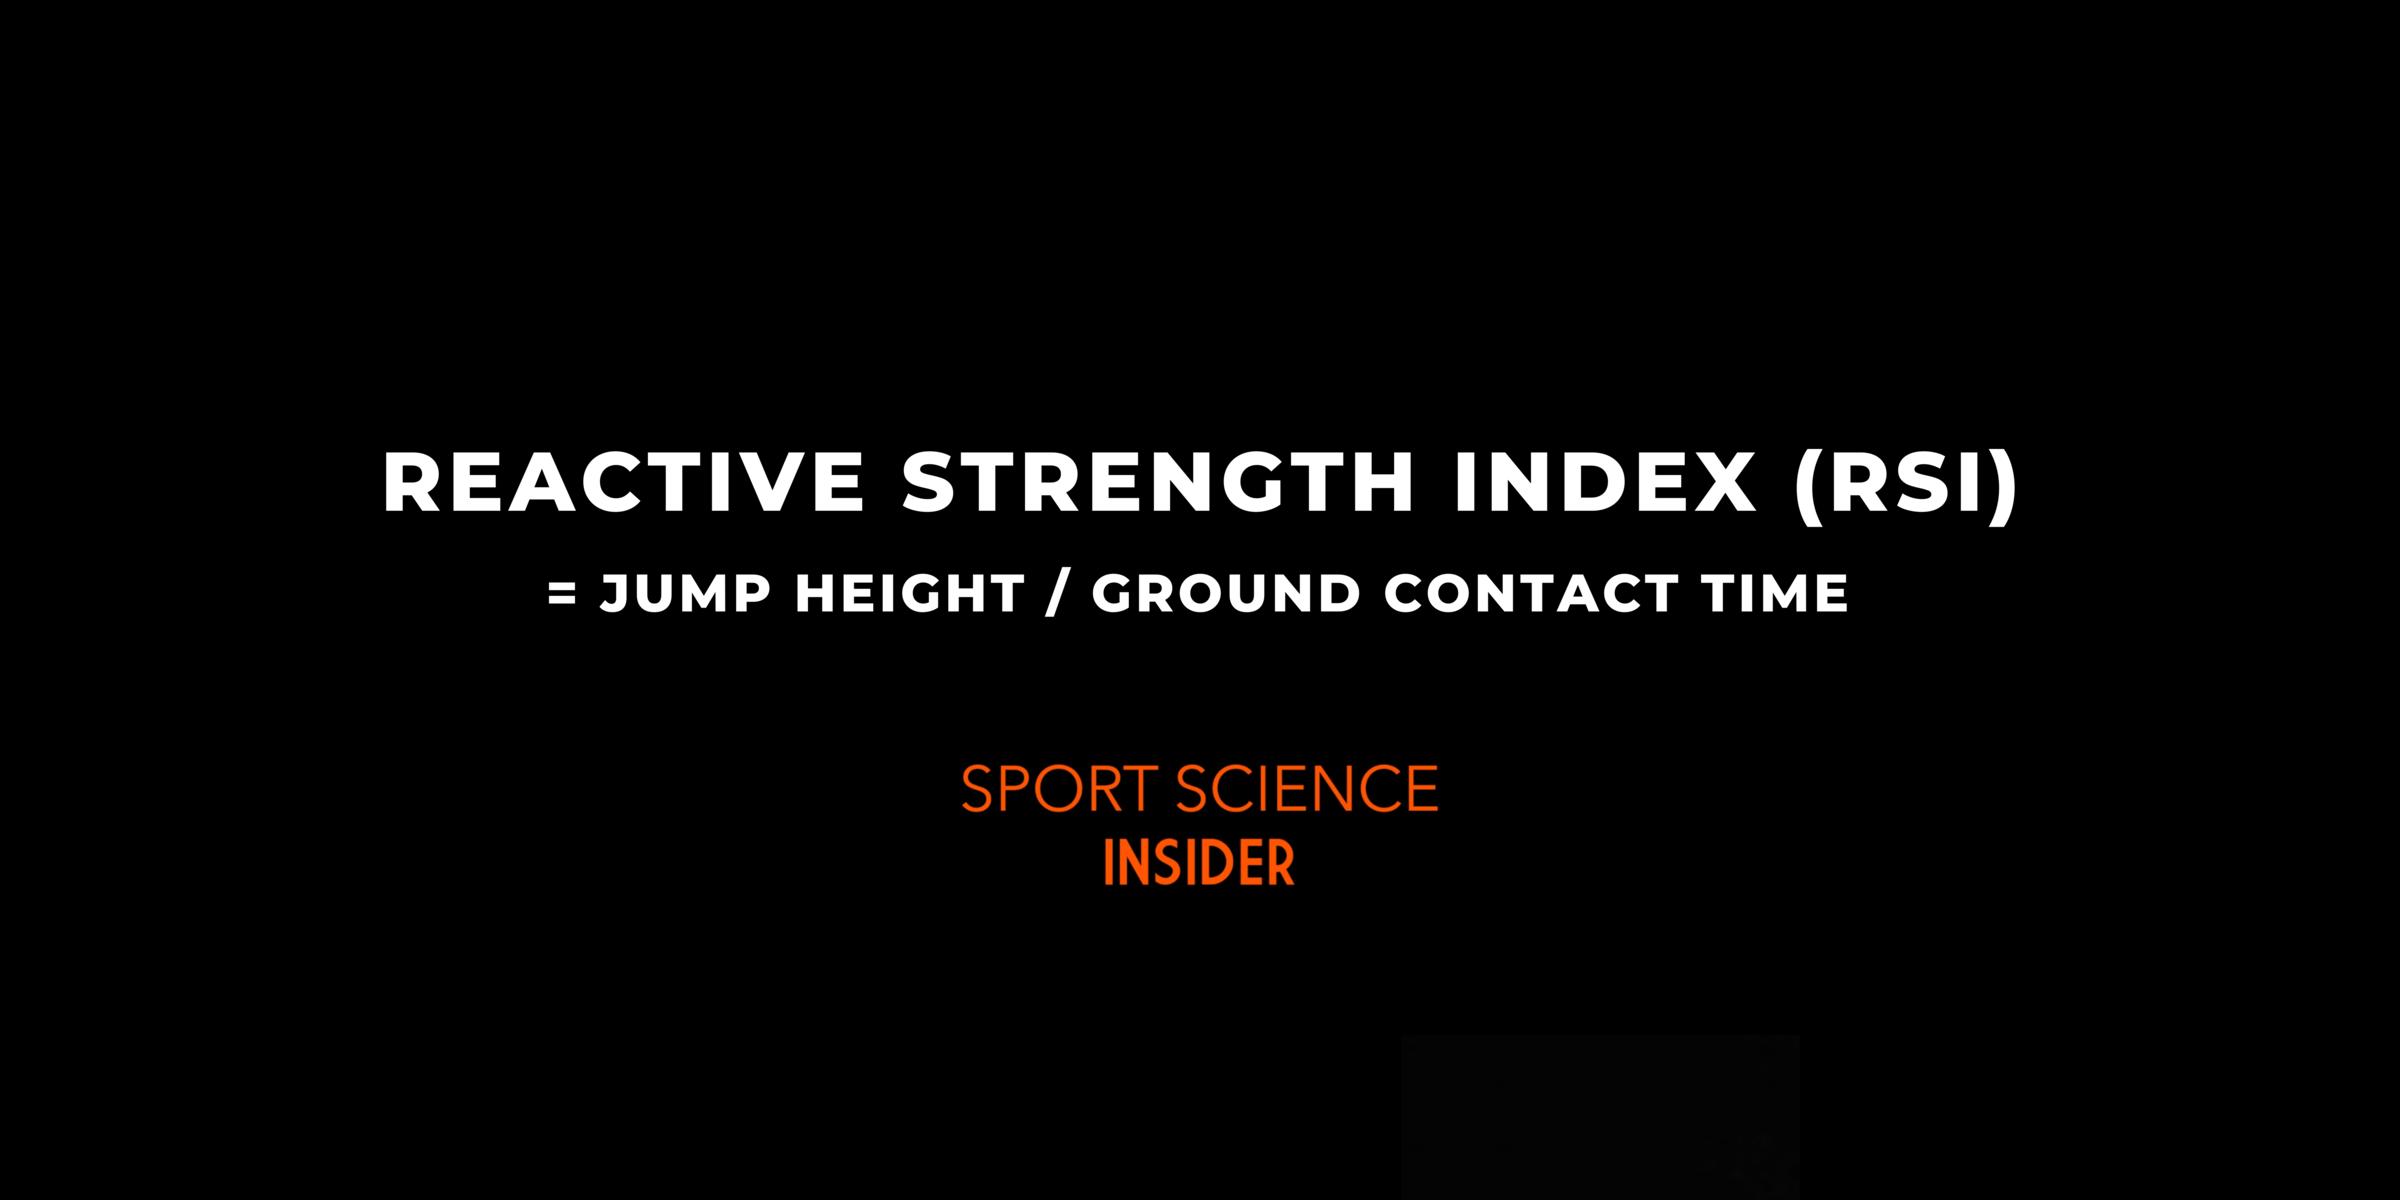 Reactive Strength Index = Jump Height / Ground Contact Time